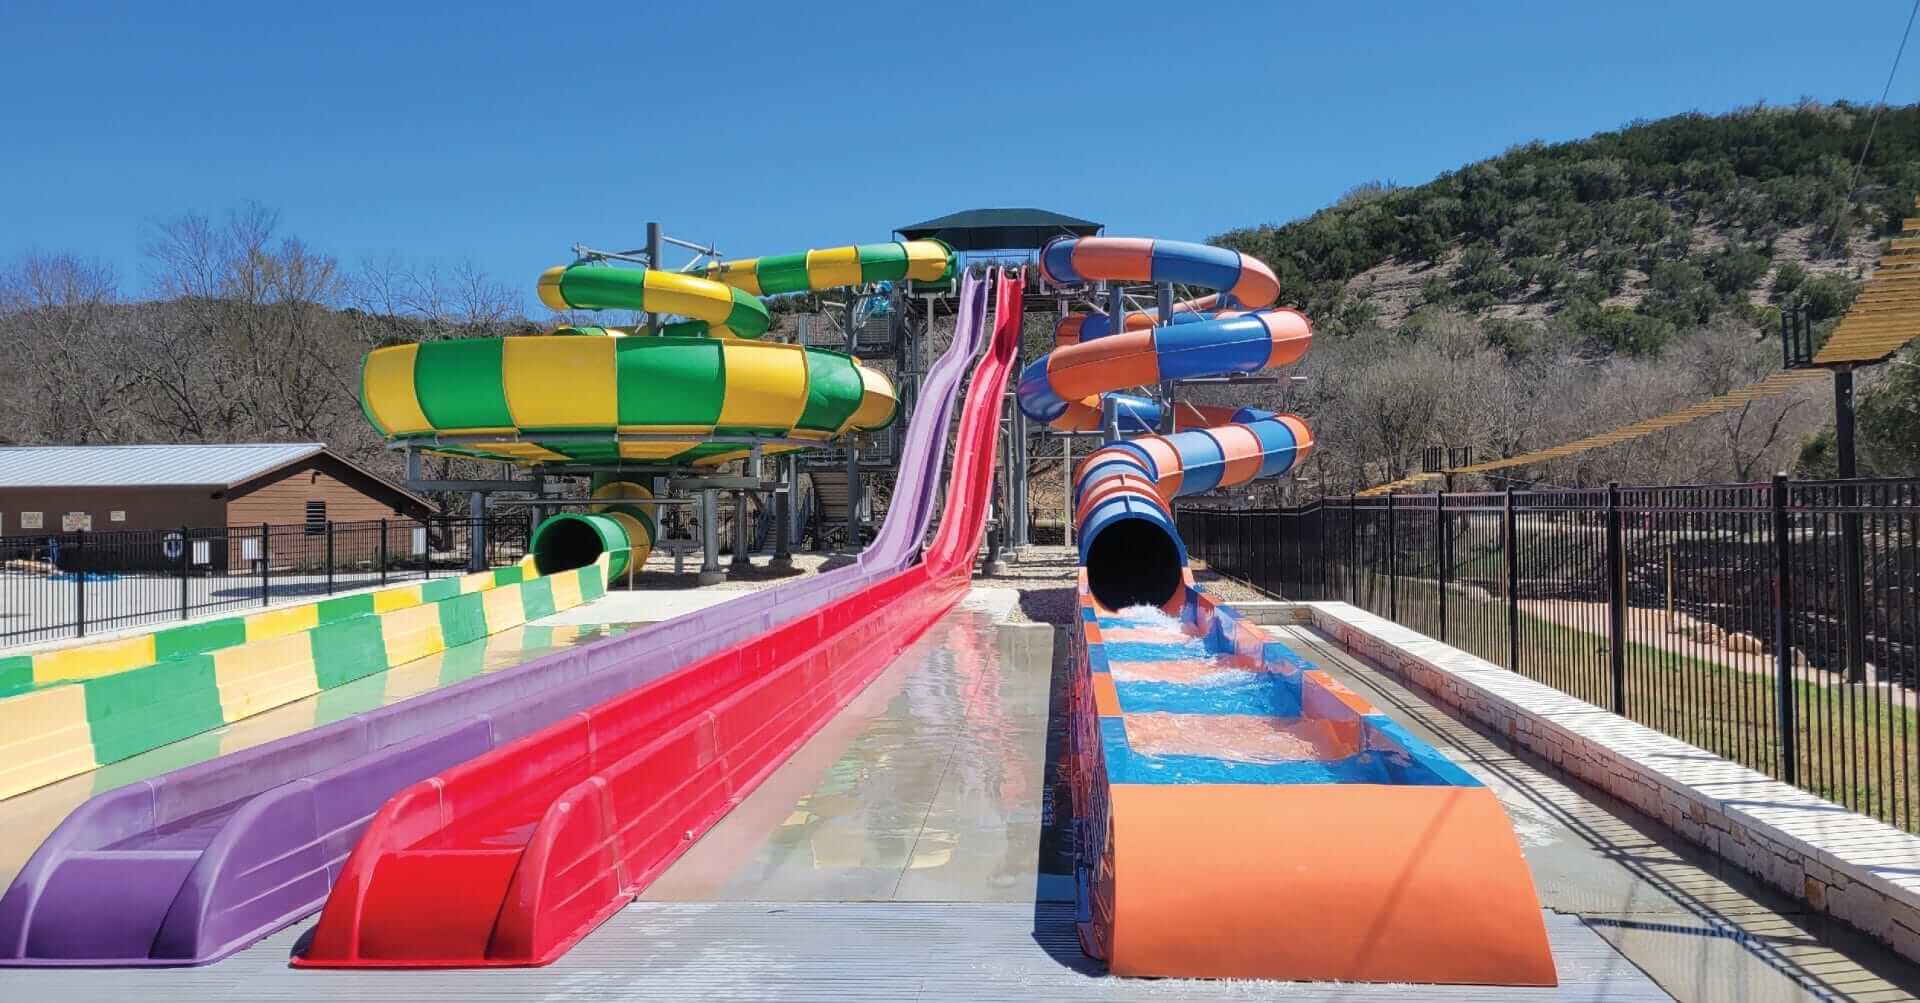 Water slides provided by our partners at the Camp Fimfo in New Braunfels, Texas.